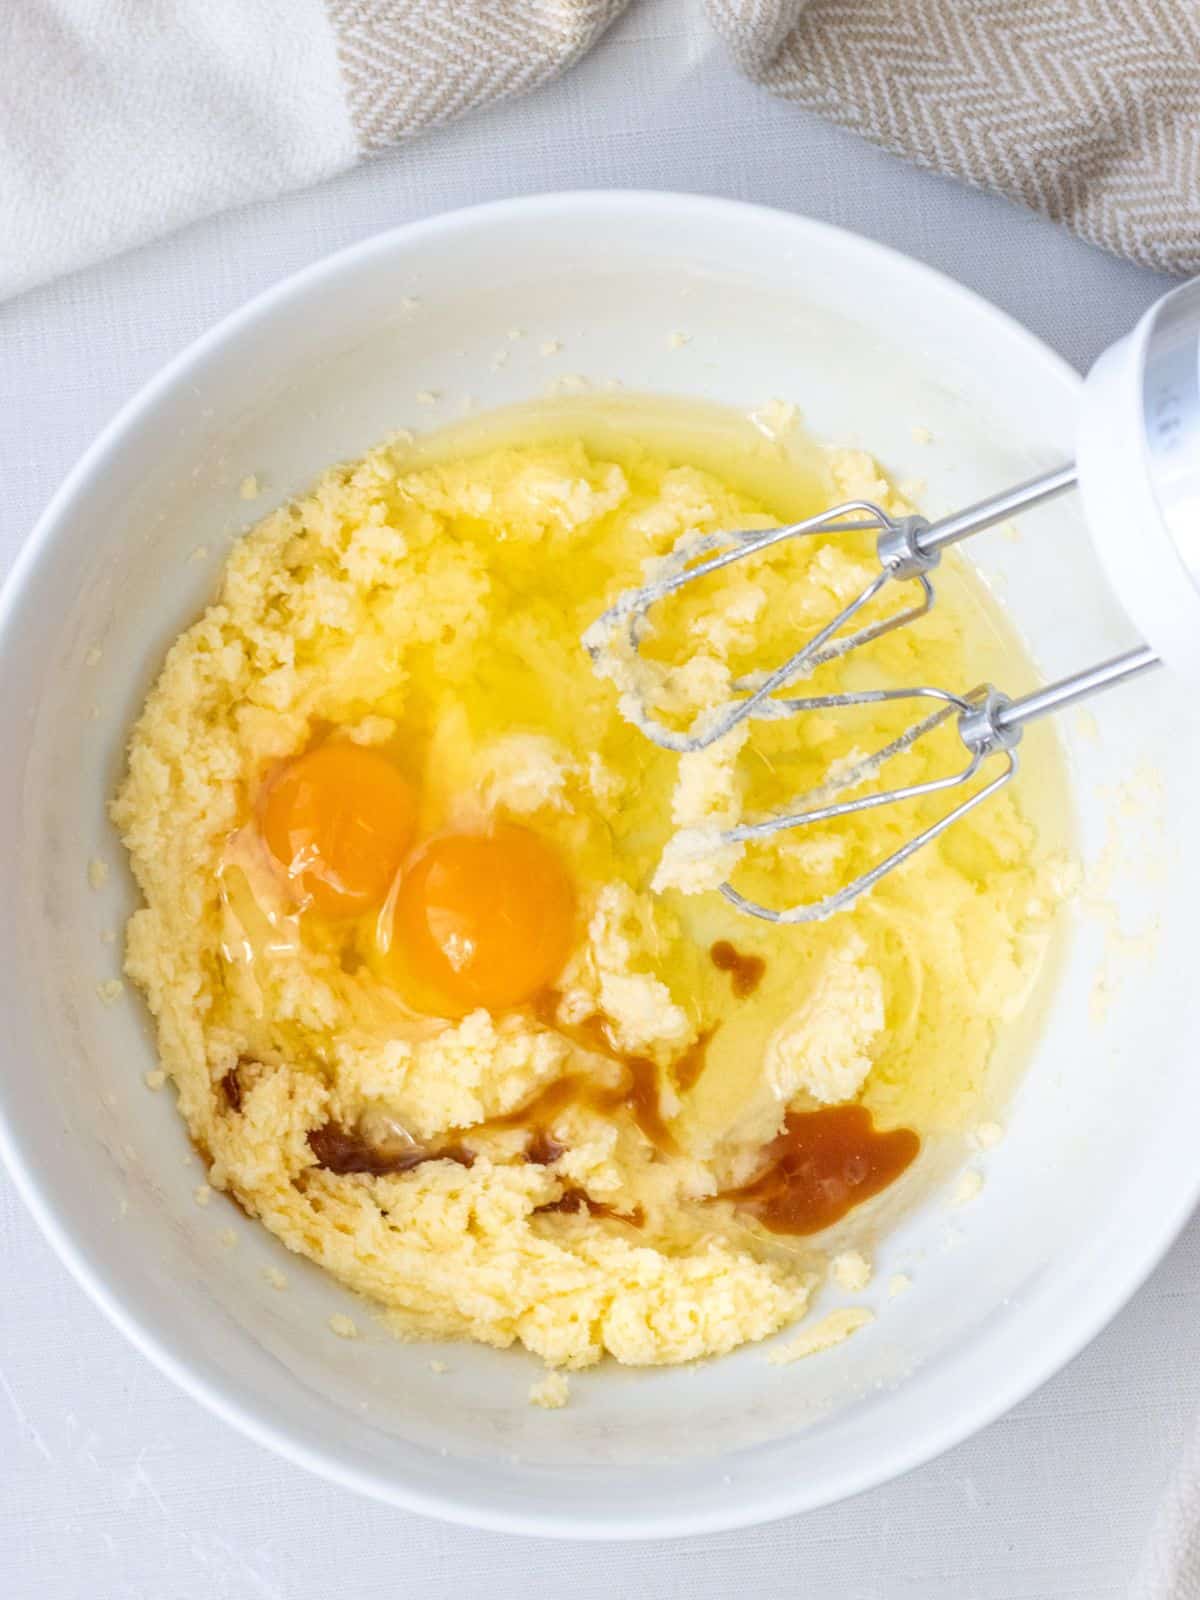 Creamed butter and sugar in a bowl with two eggs, oil, and vanilla extract.